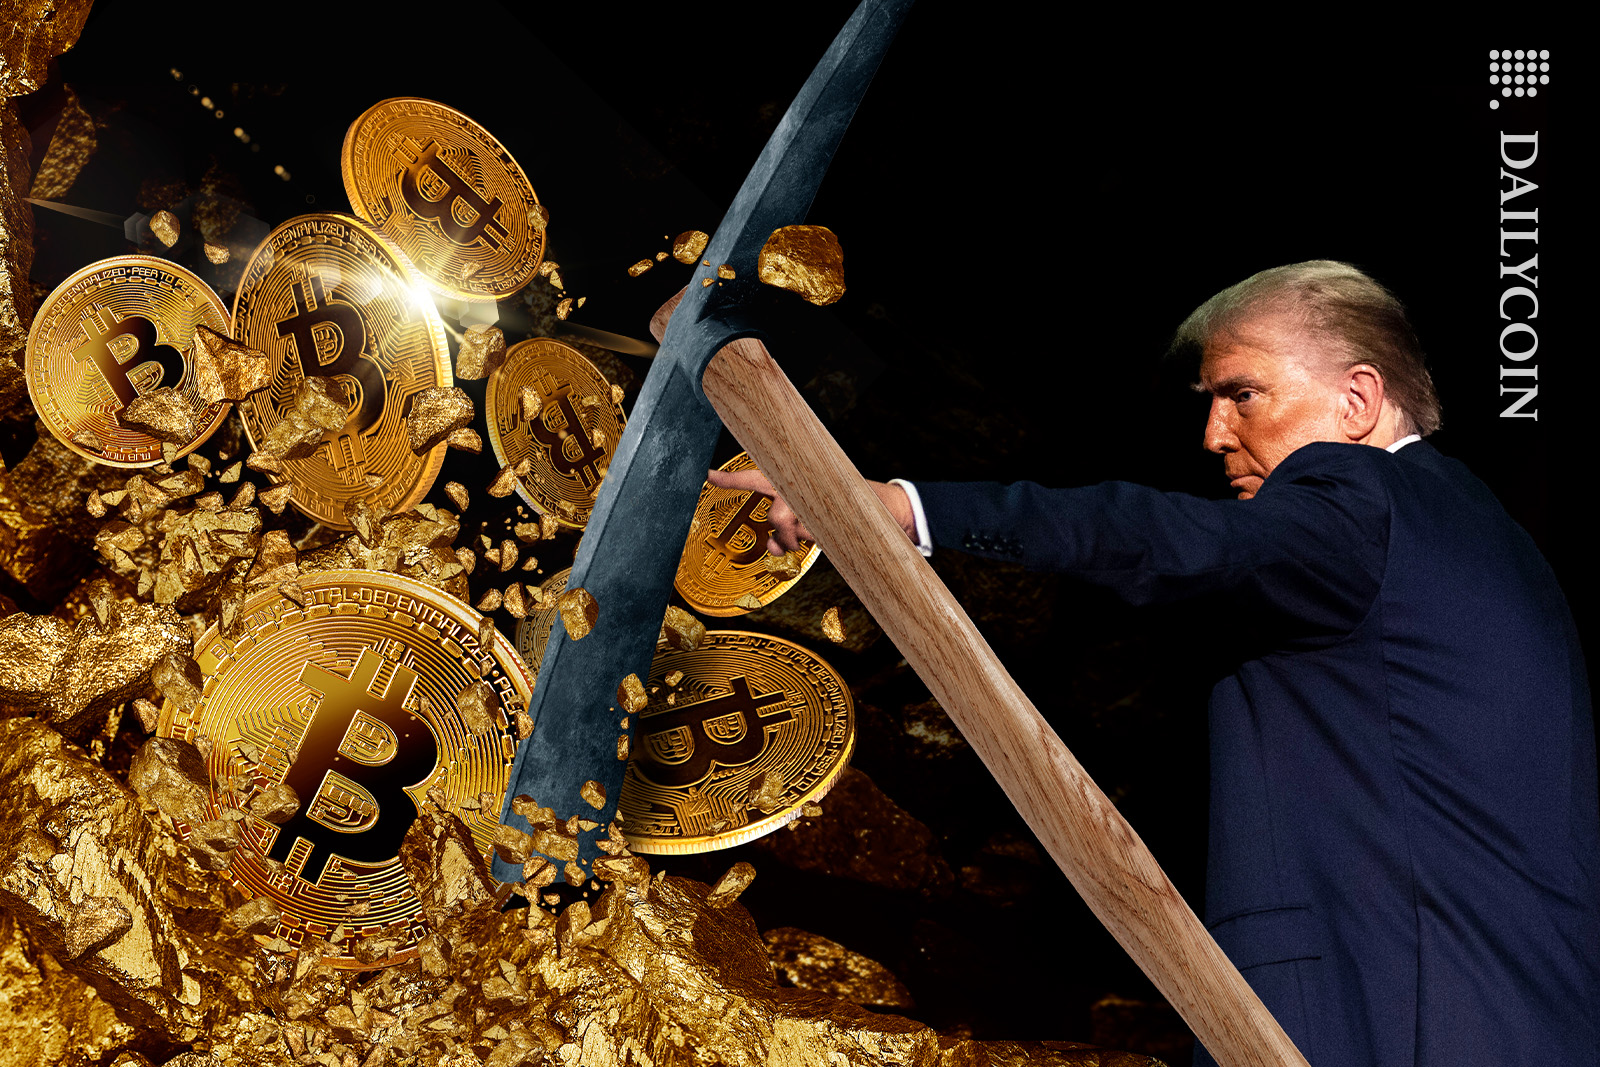 Trump with a giant pickaxe mining Bitcoin.